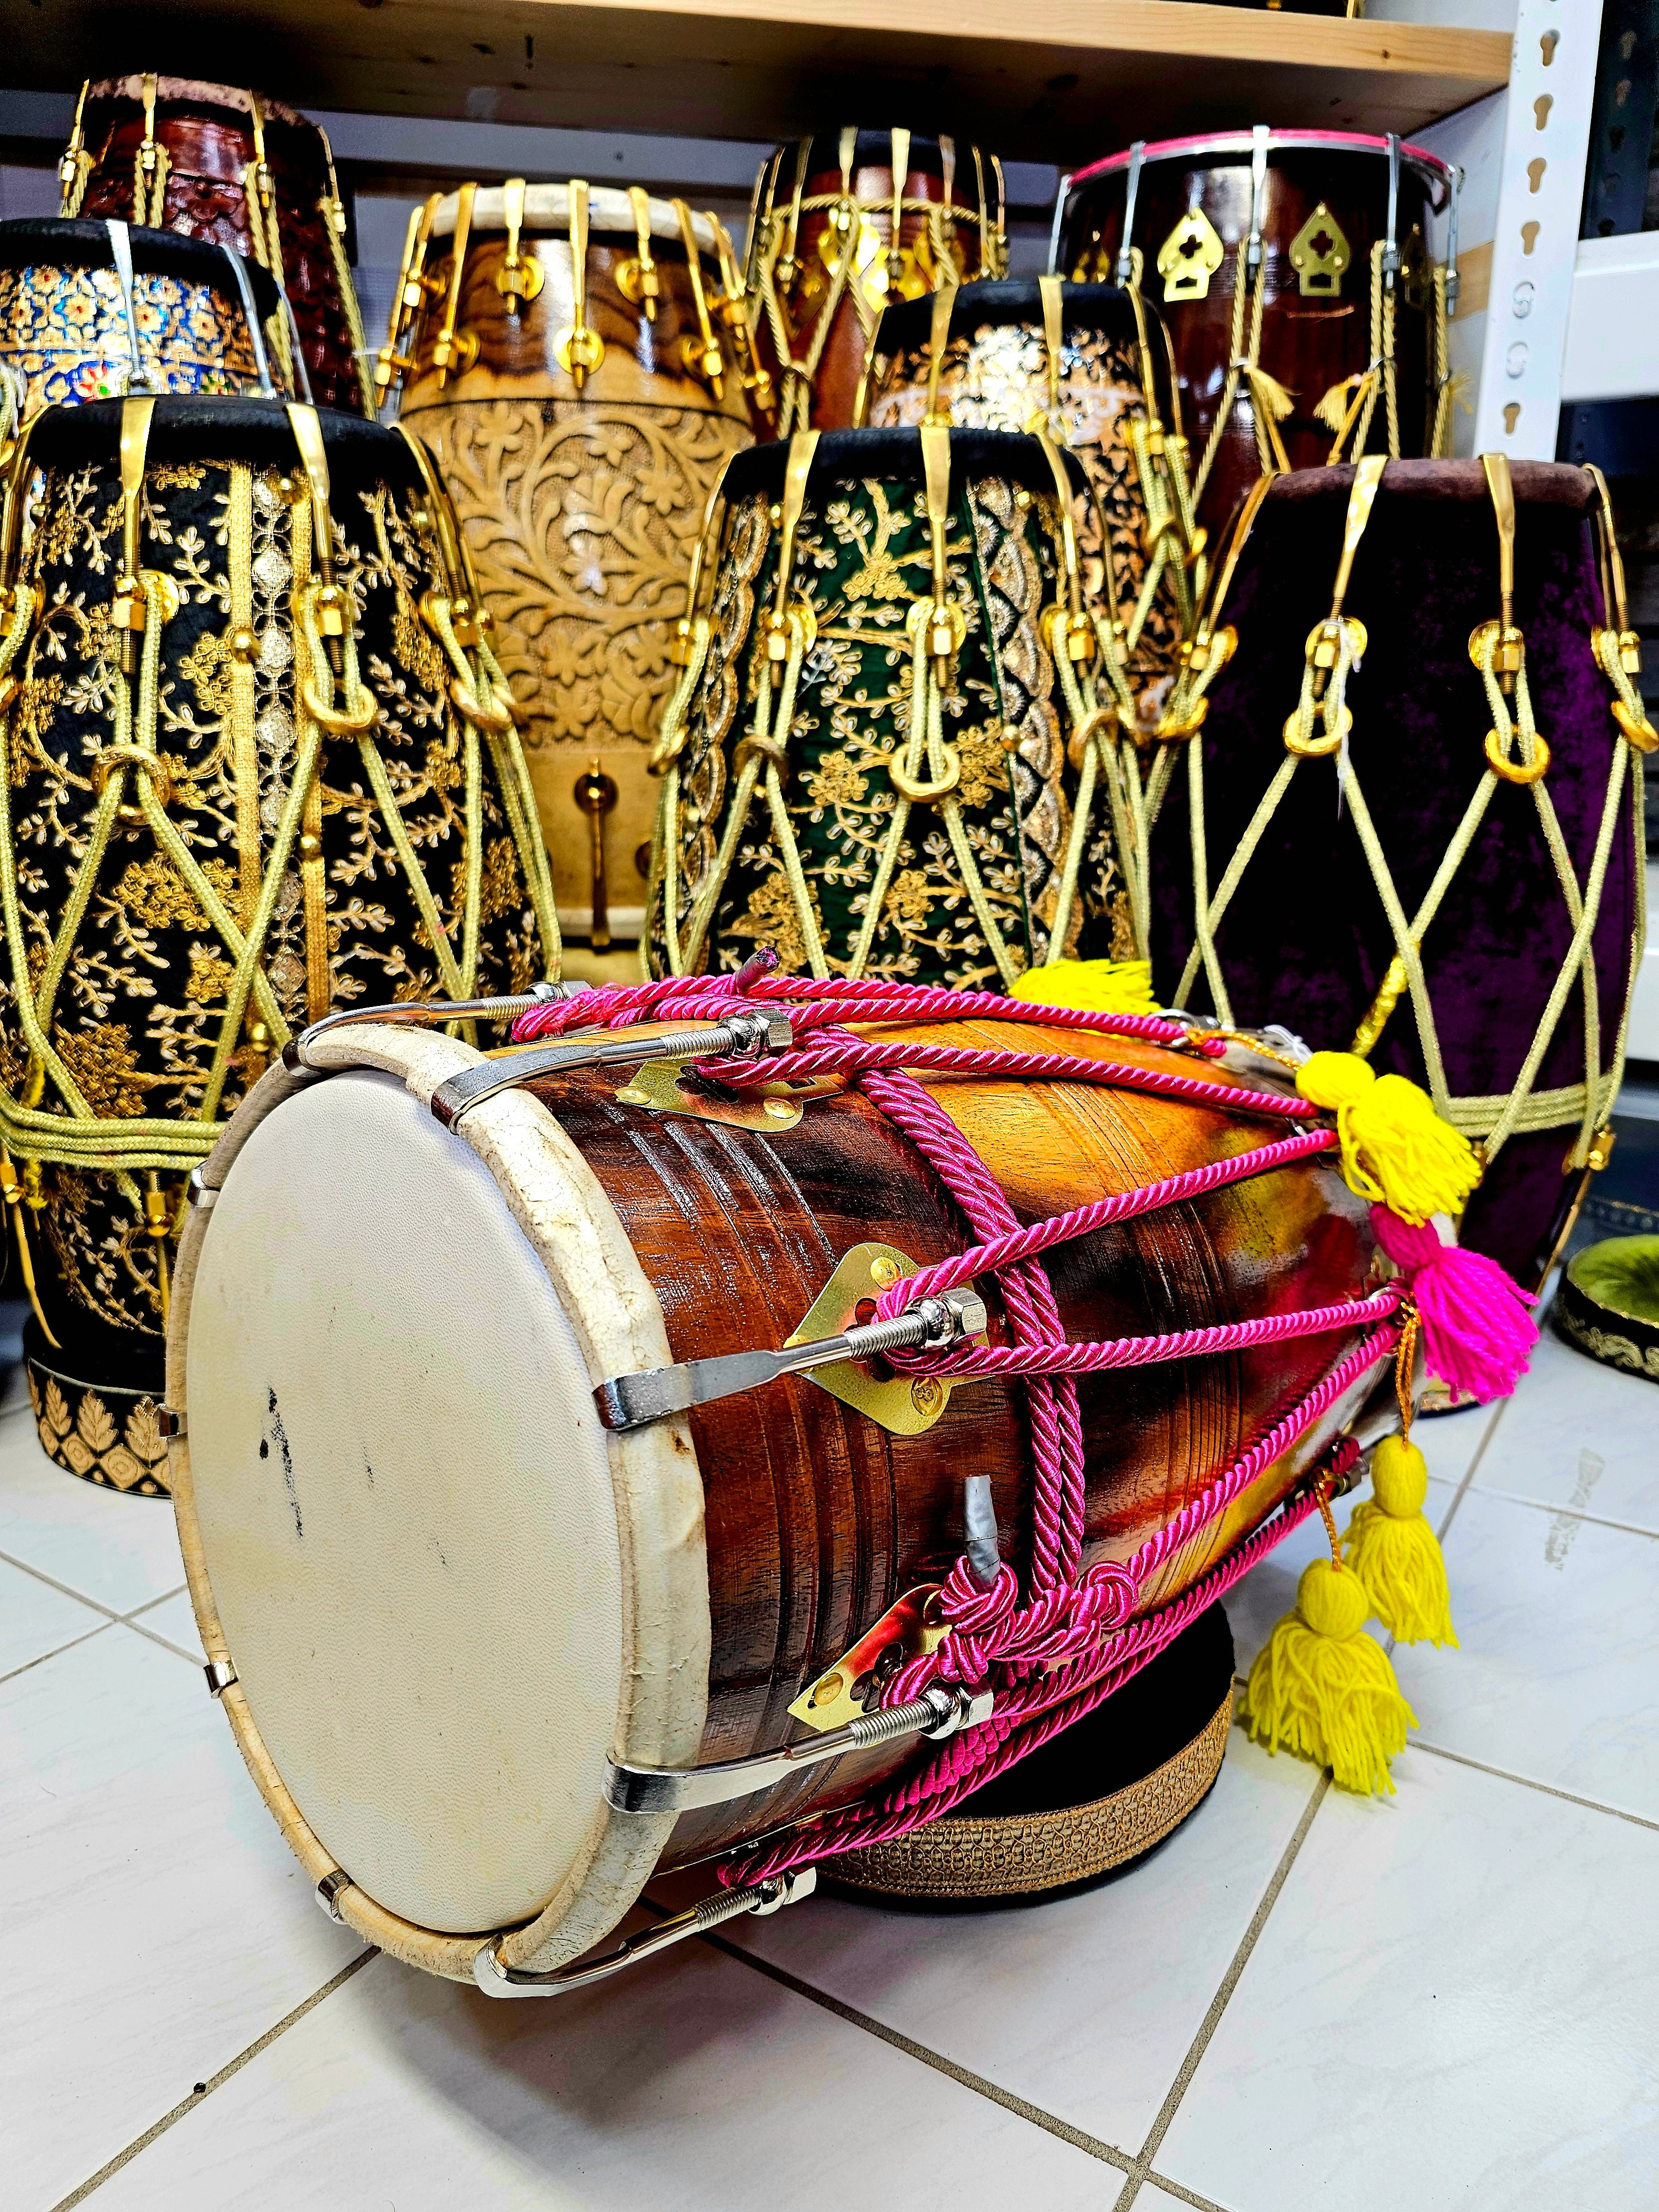 Vibrant Harmony: Glossy 2-Tone Red Sheesham Dholak with Chrome Bolts, Pink Ropes Design, and Playful Pink & Yellow Tassels